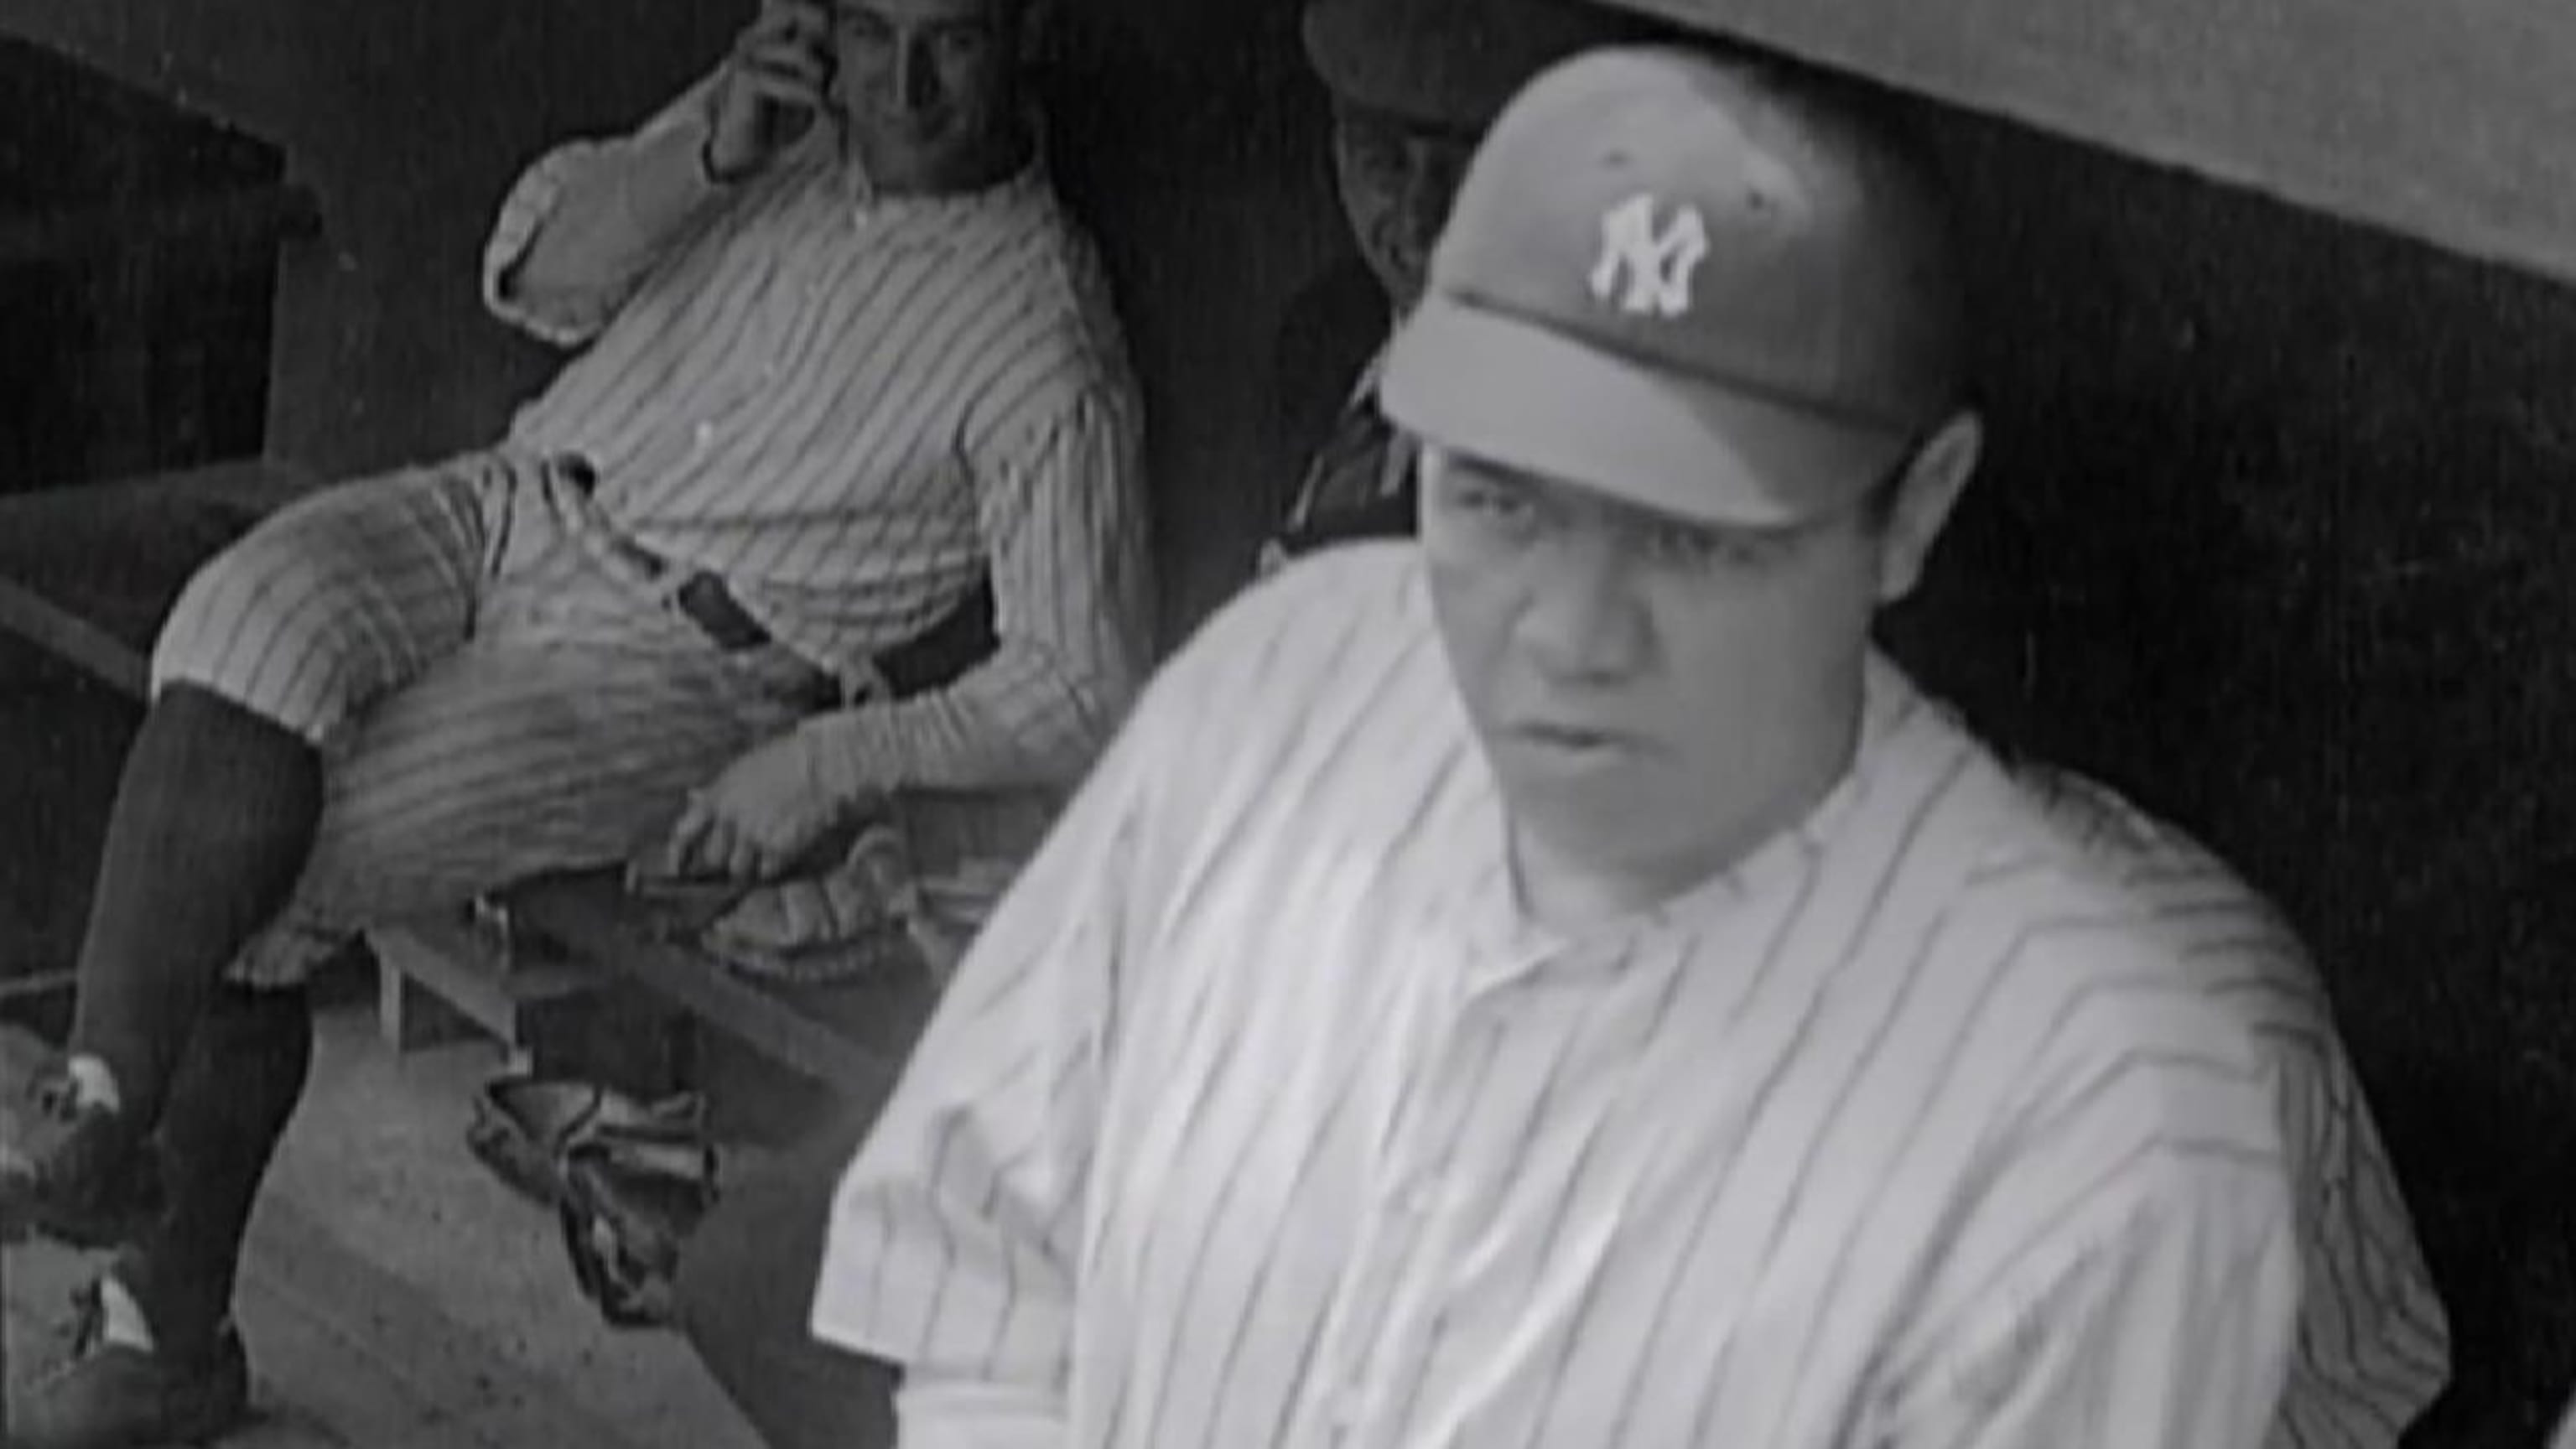 Lou Gehrig's Death and ALS: 75 Years Later